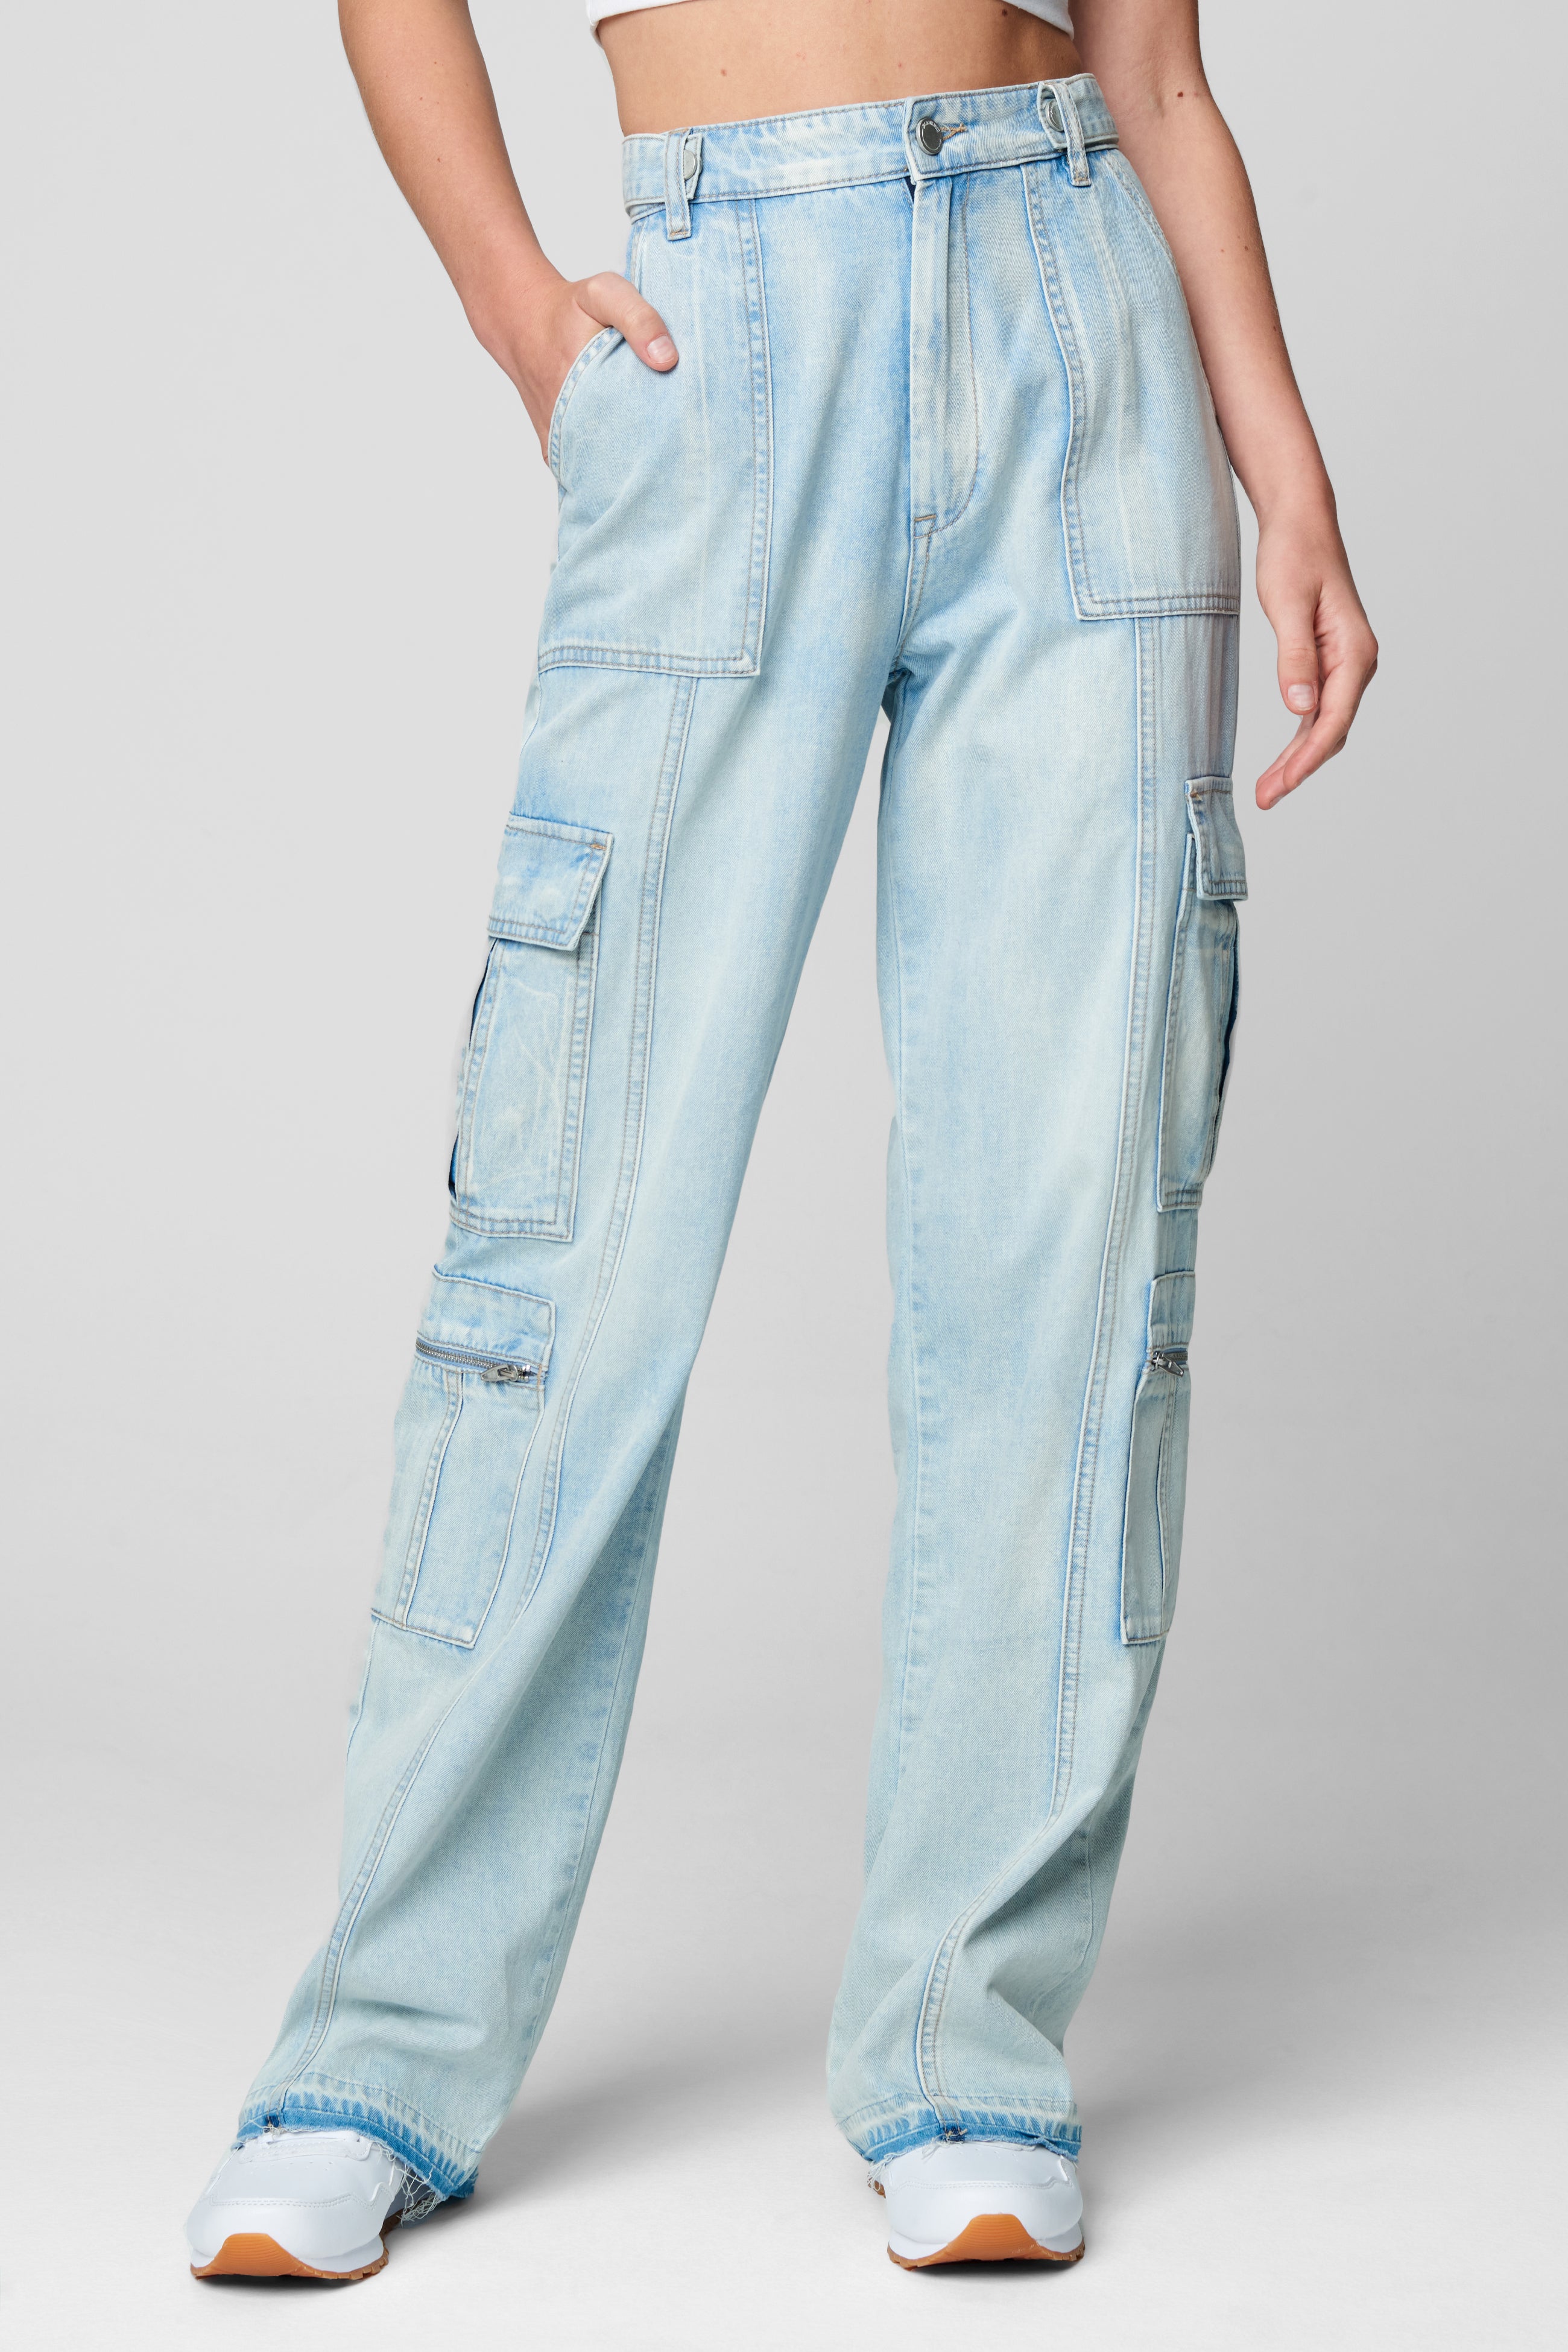 Call My Name Cargo Pants Blue | LIT Boutique | Weite Hosen